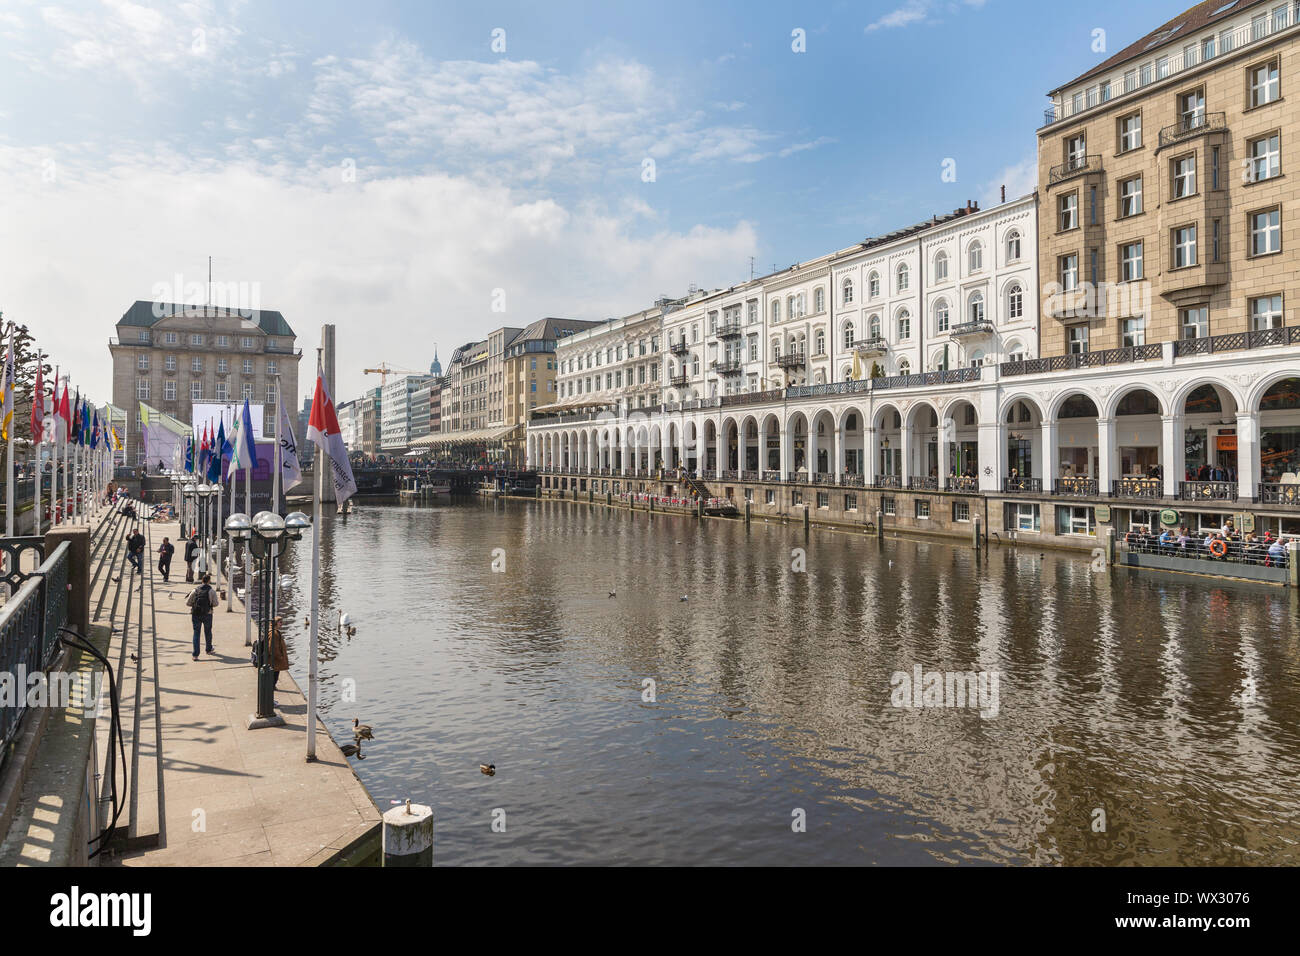 HAMBURG  - APRIL 25: Historic center at town canal 'Kleine Alster'  on April 25, 2013 in Hamburg, Germany Stock Photo